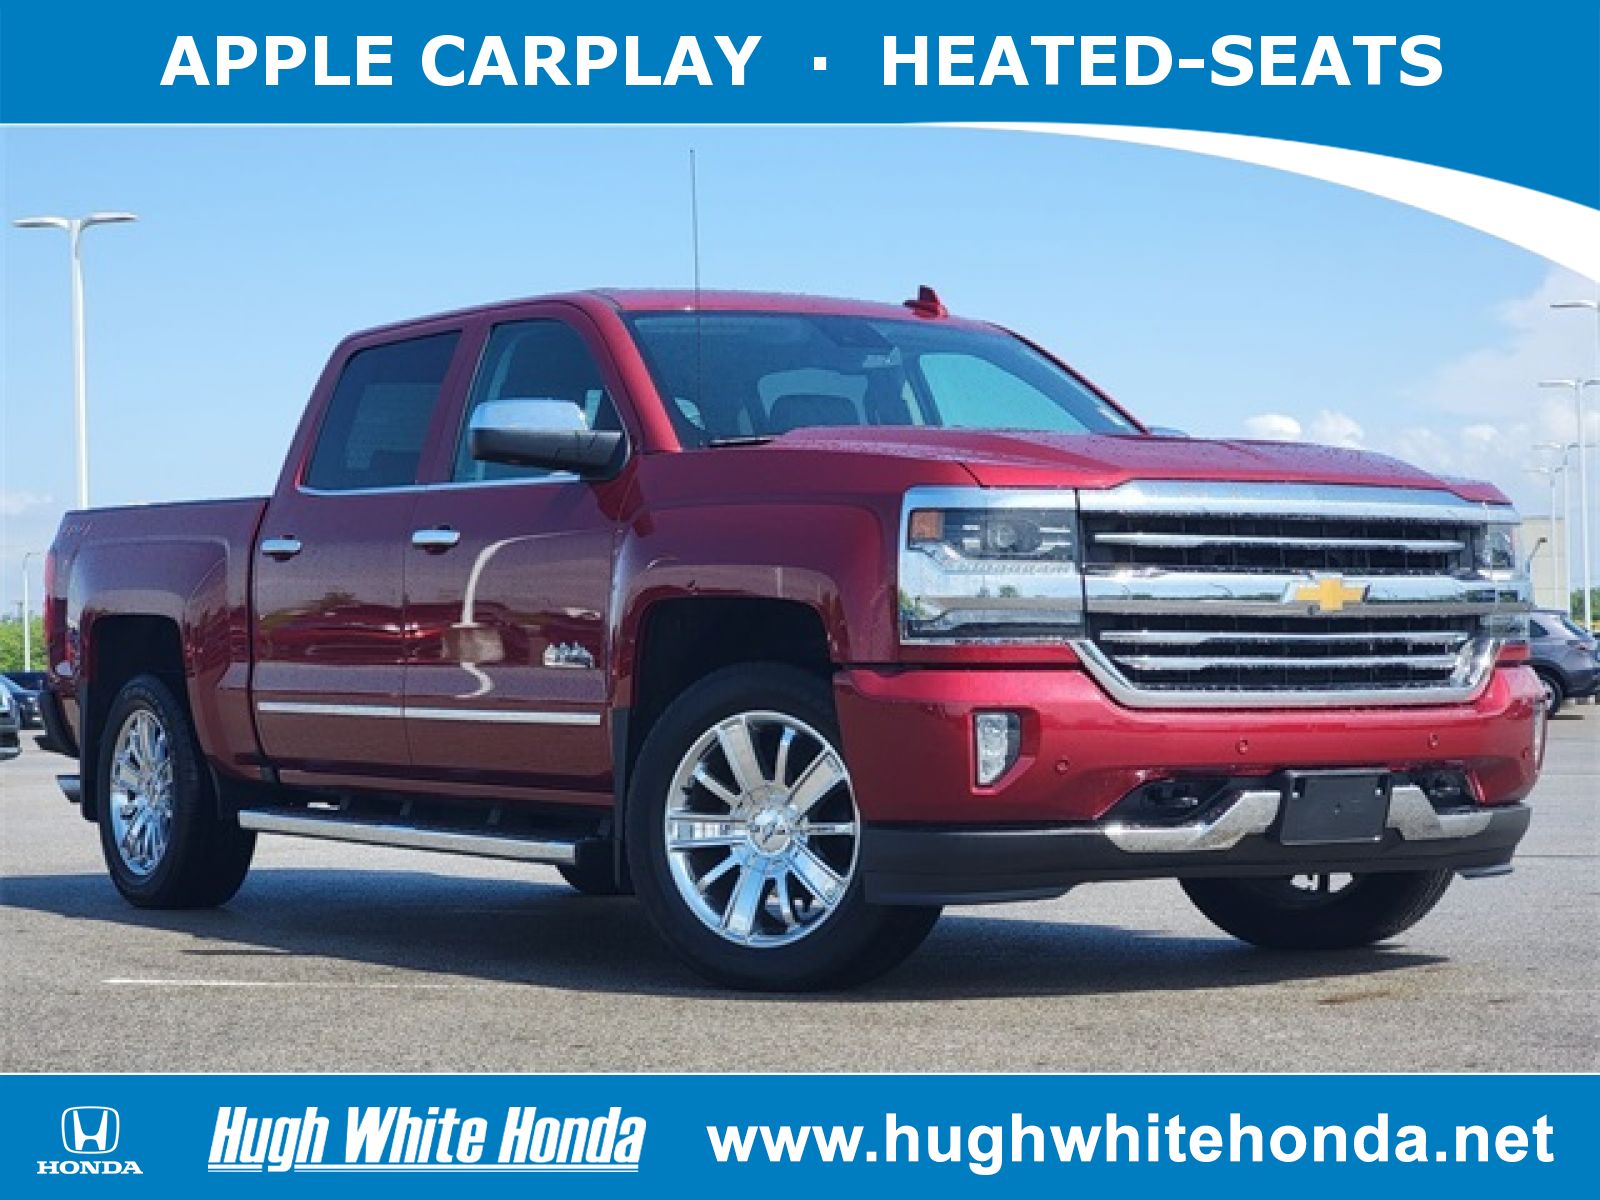 Used, 2018 Chevrolet Silverado 1500 High Country, Red, 14048-1